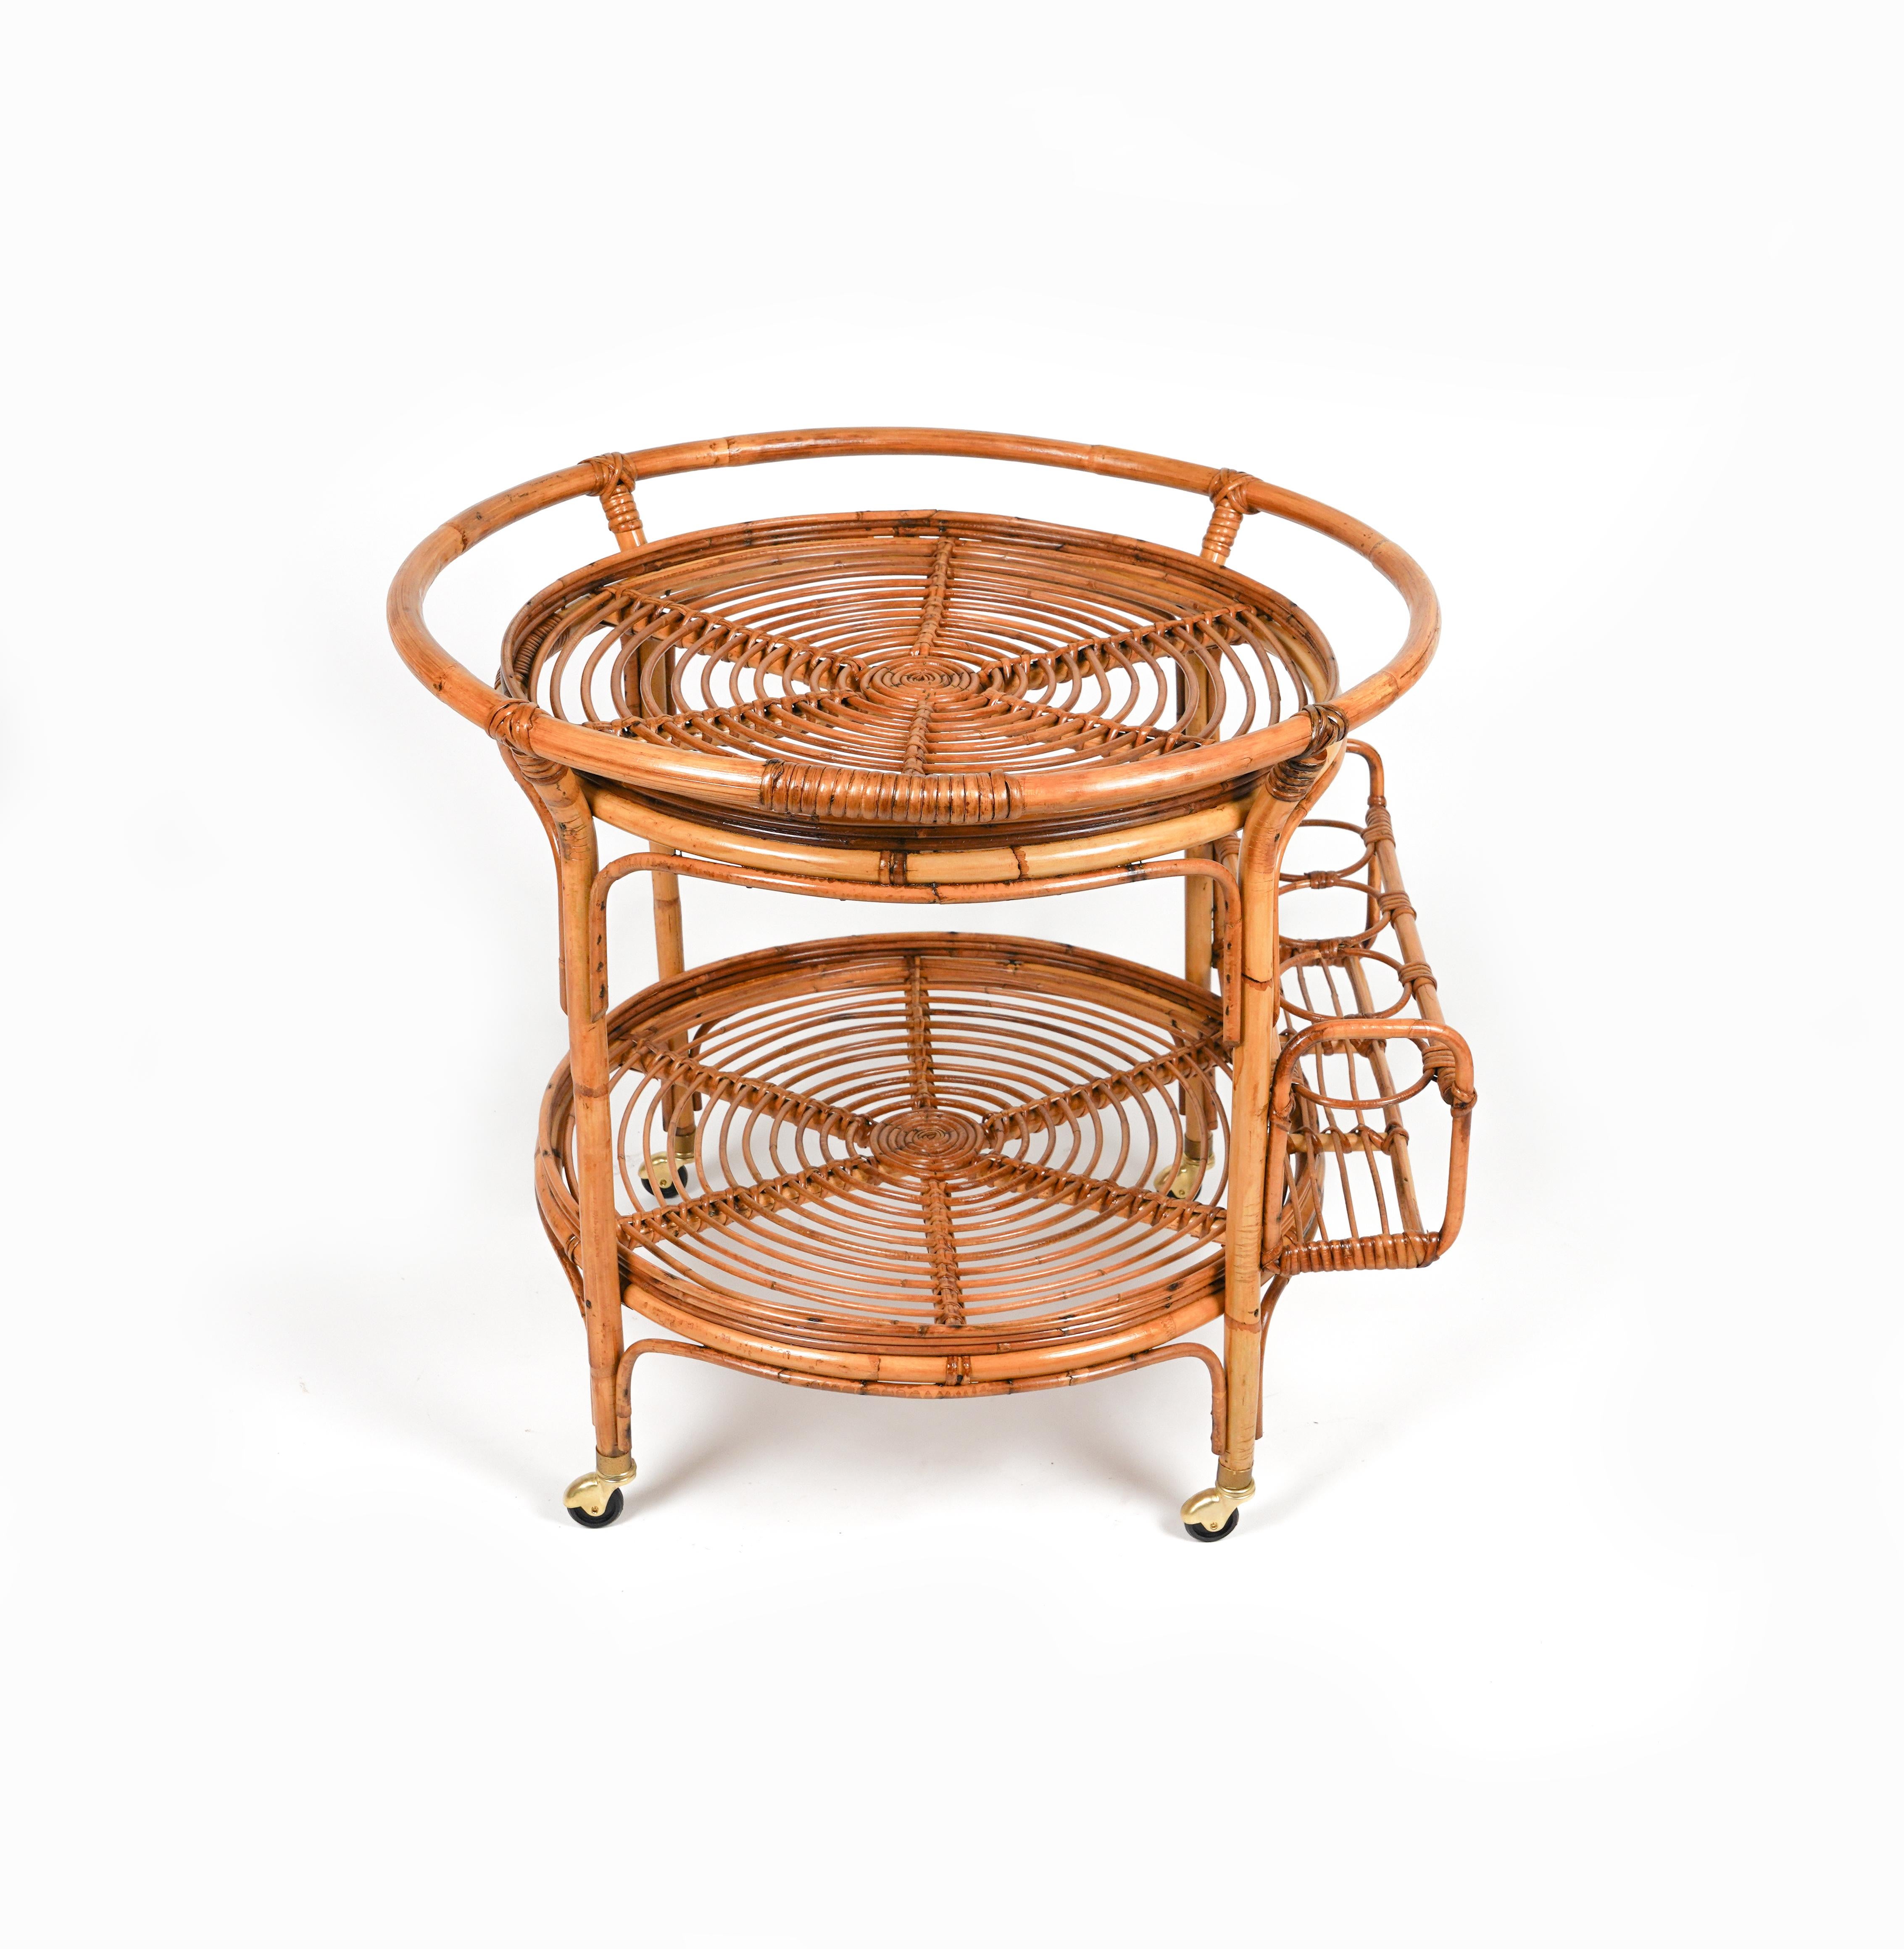 Mid-20th Century Midcentury Rattan and Bamboo Round Serving Bar Cart Trolley, Italy 1960s For Sale